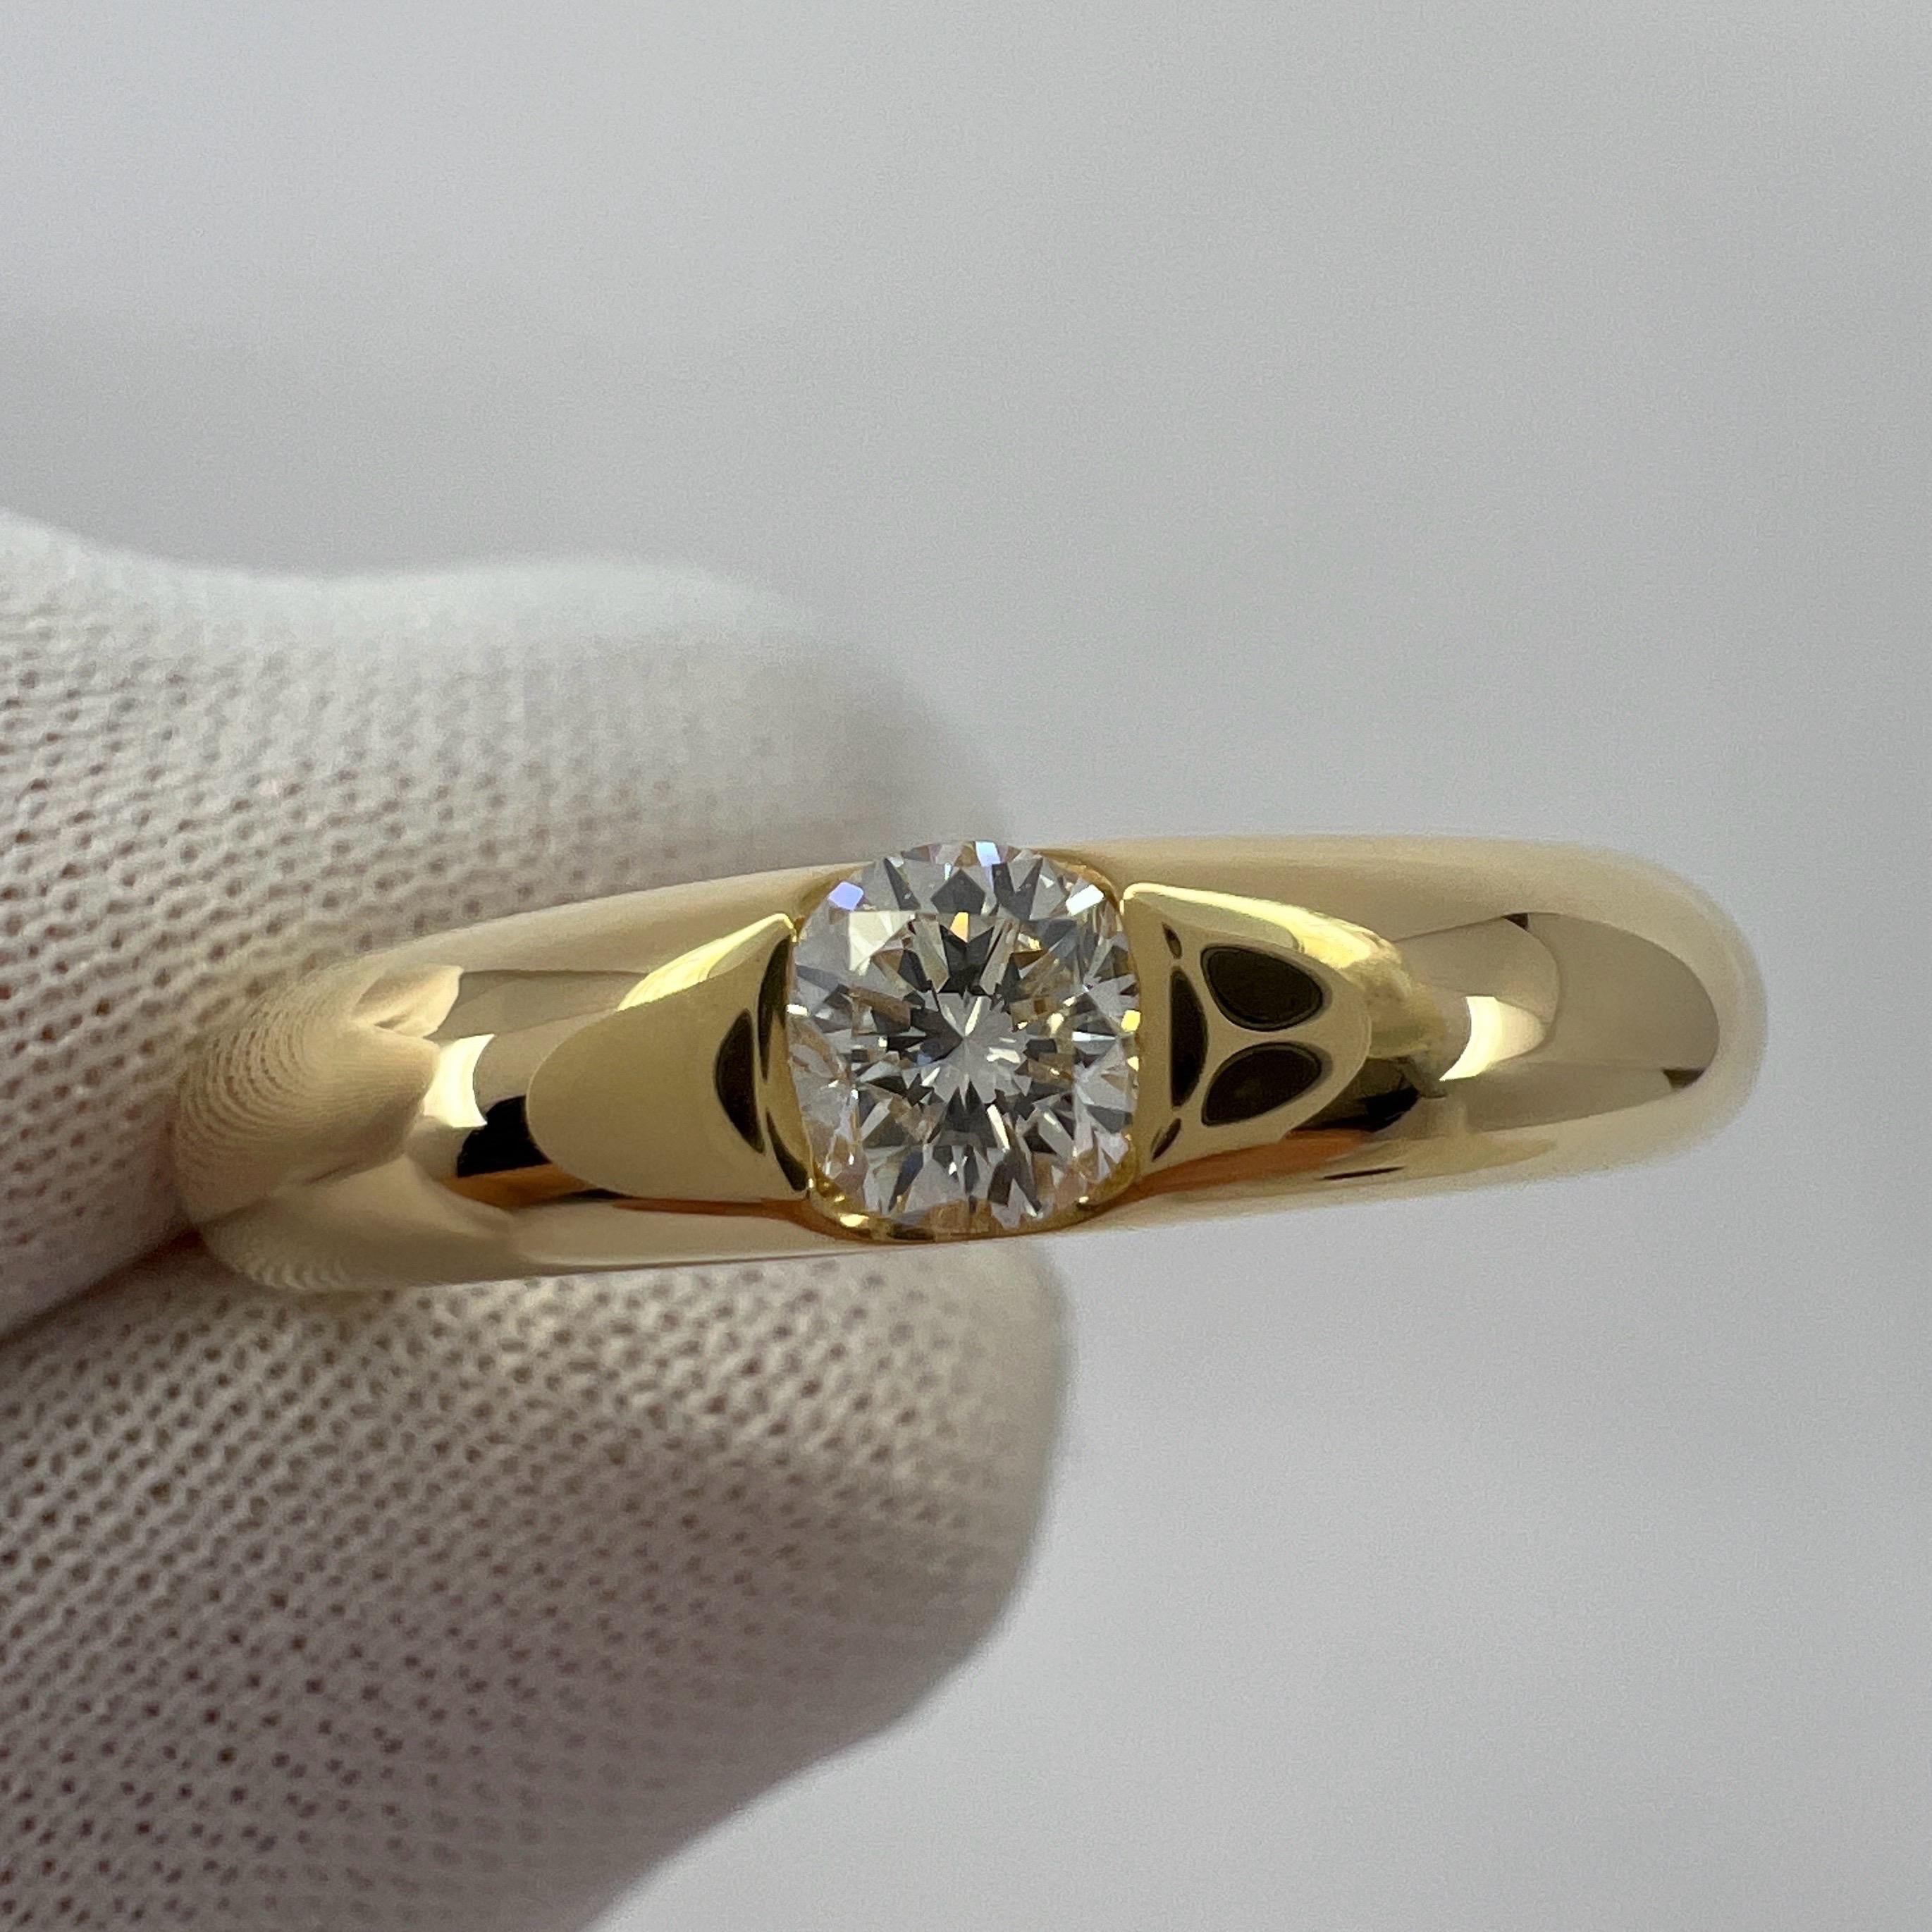 Vintage Cartier Round Diamond Ellipse 18k Yellow Gold Solitaire Band Ring US5 49 3